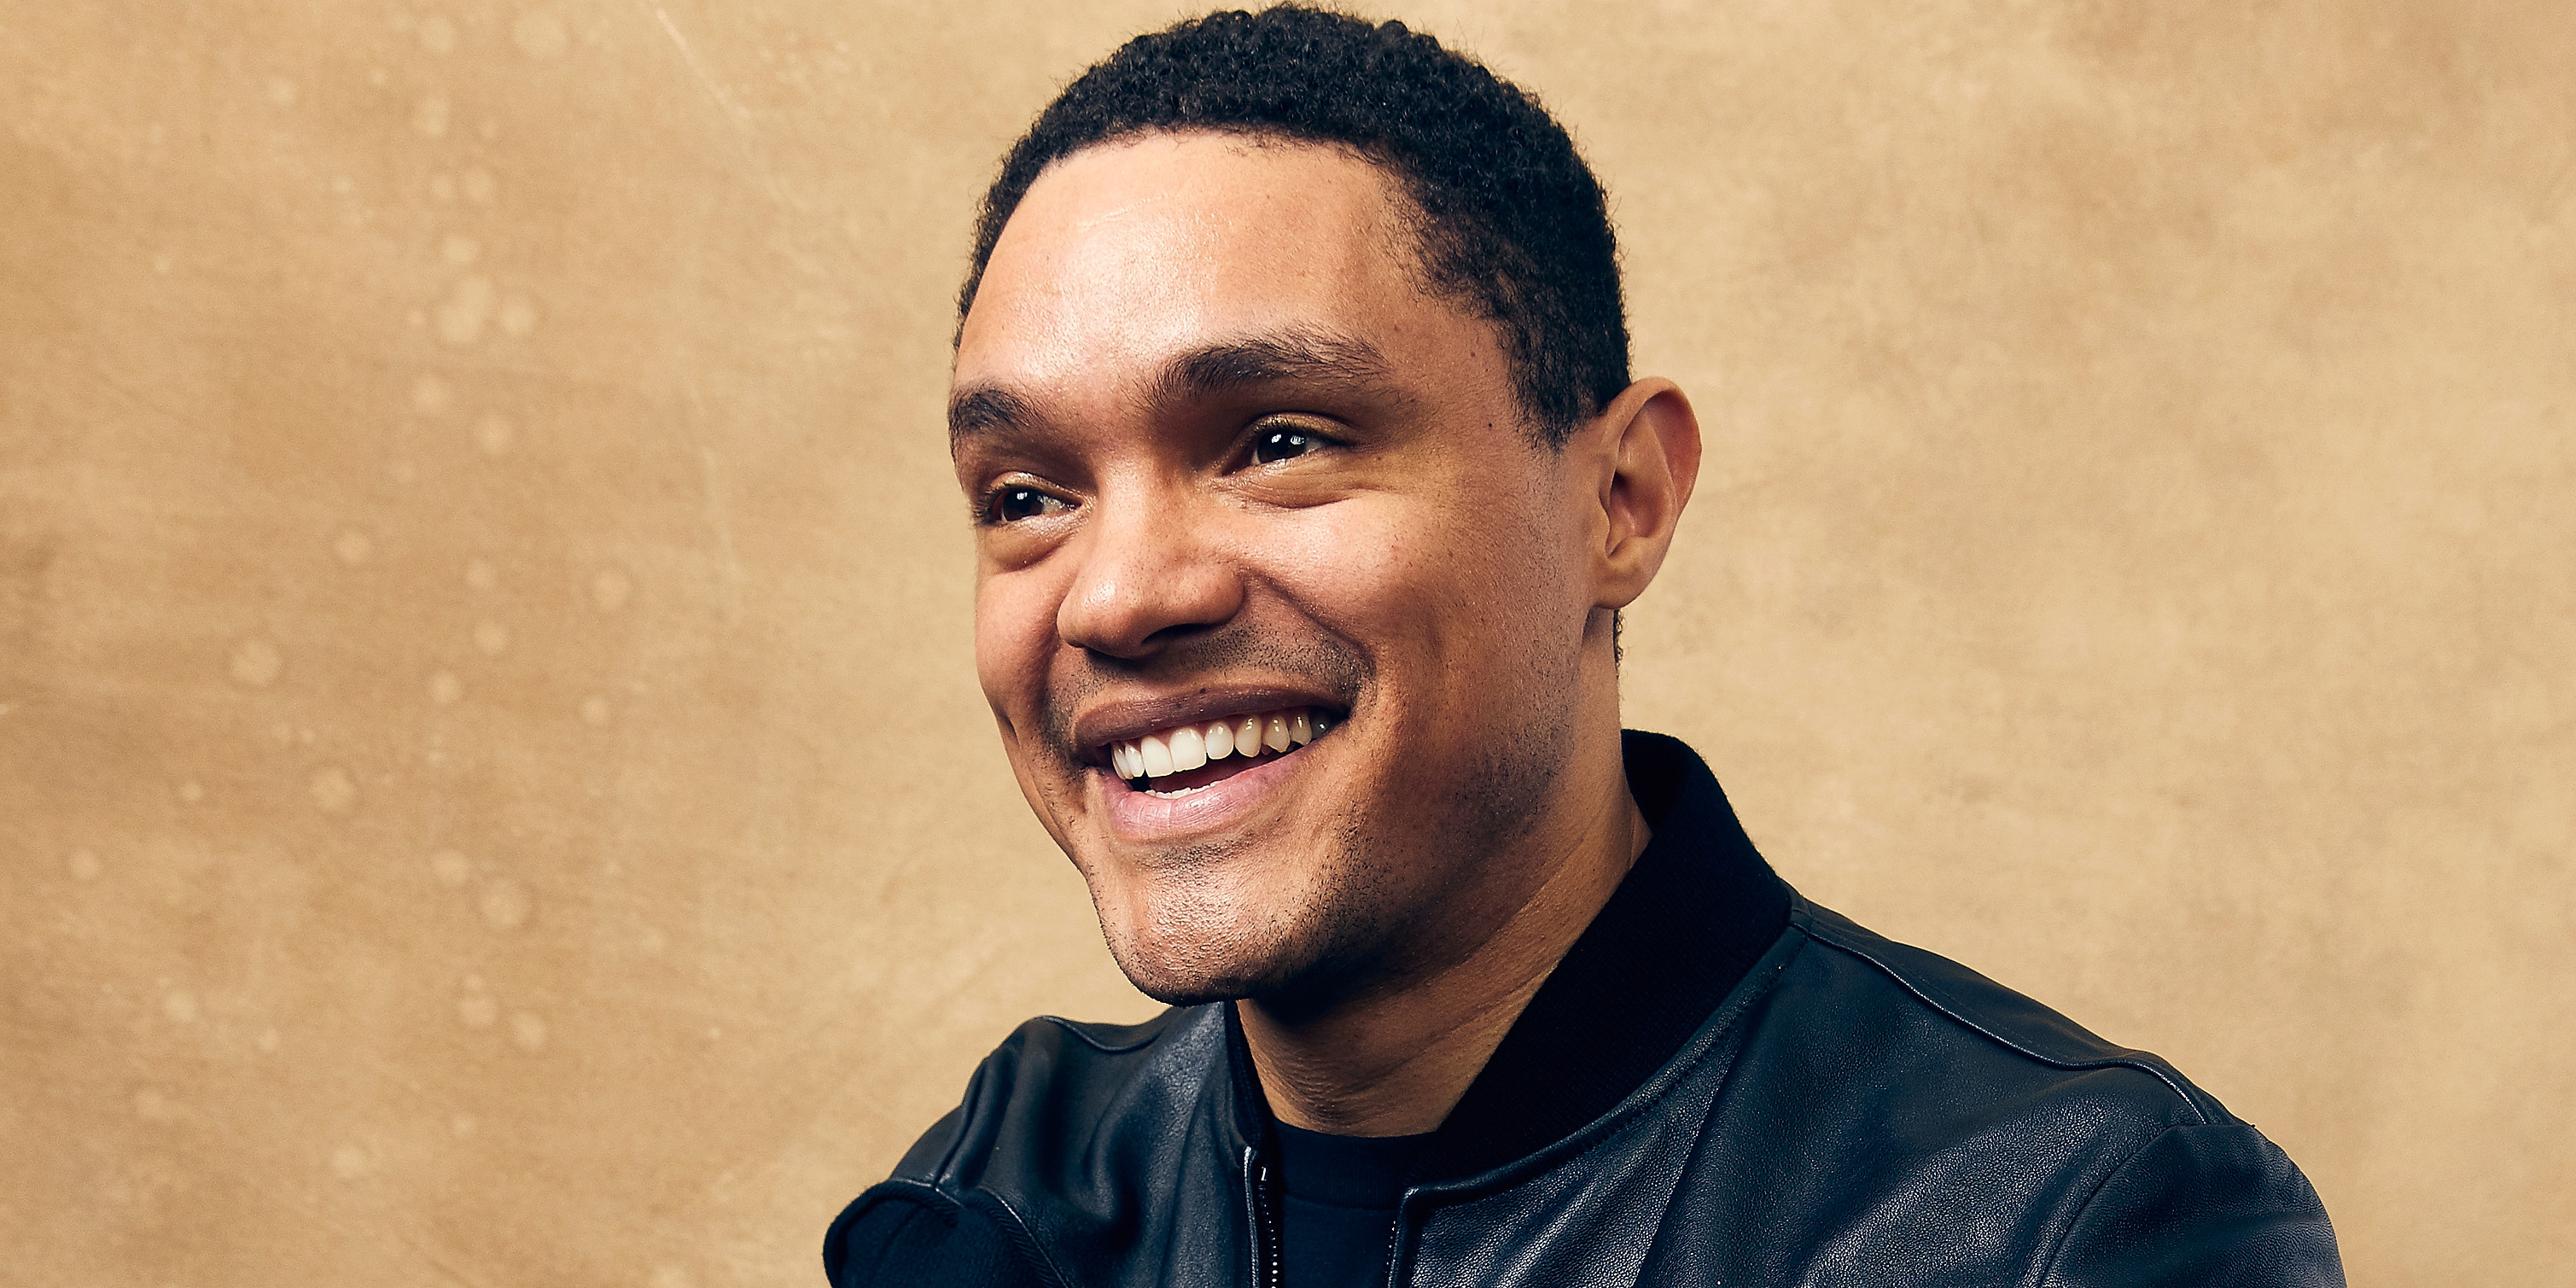 Trevor Noah says the left and the right can agree on at least one thing.